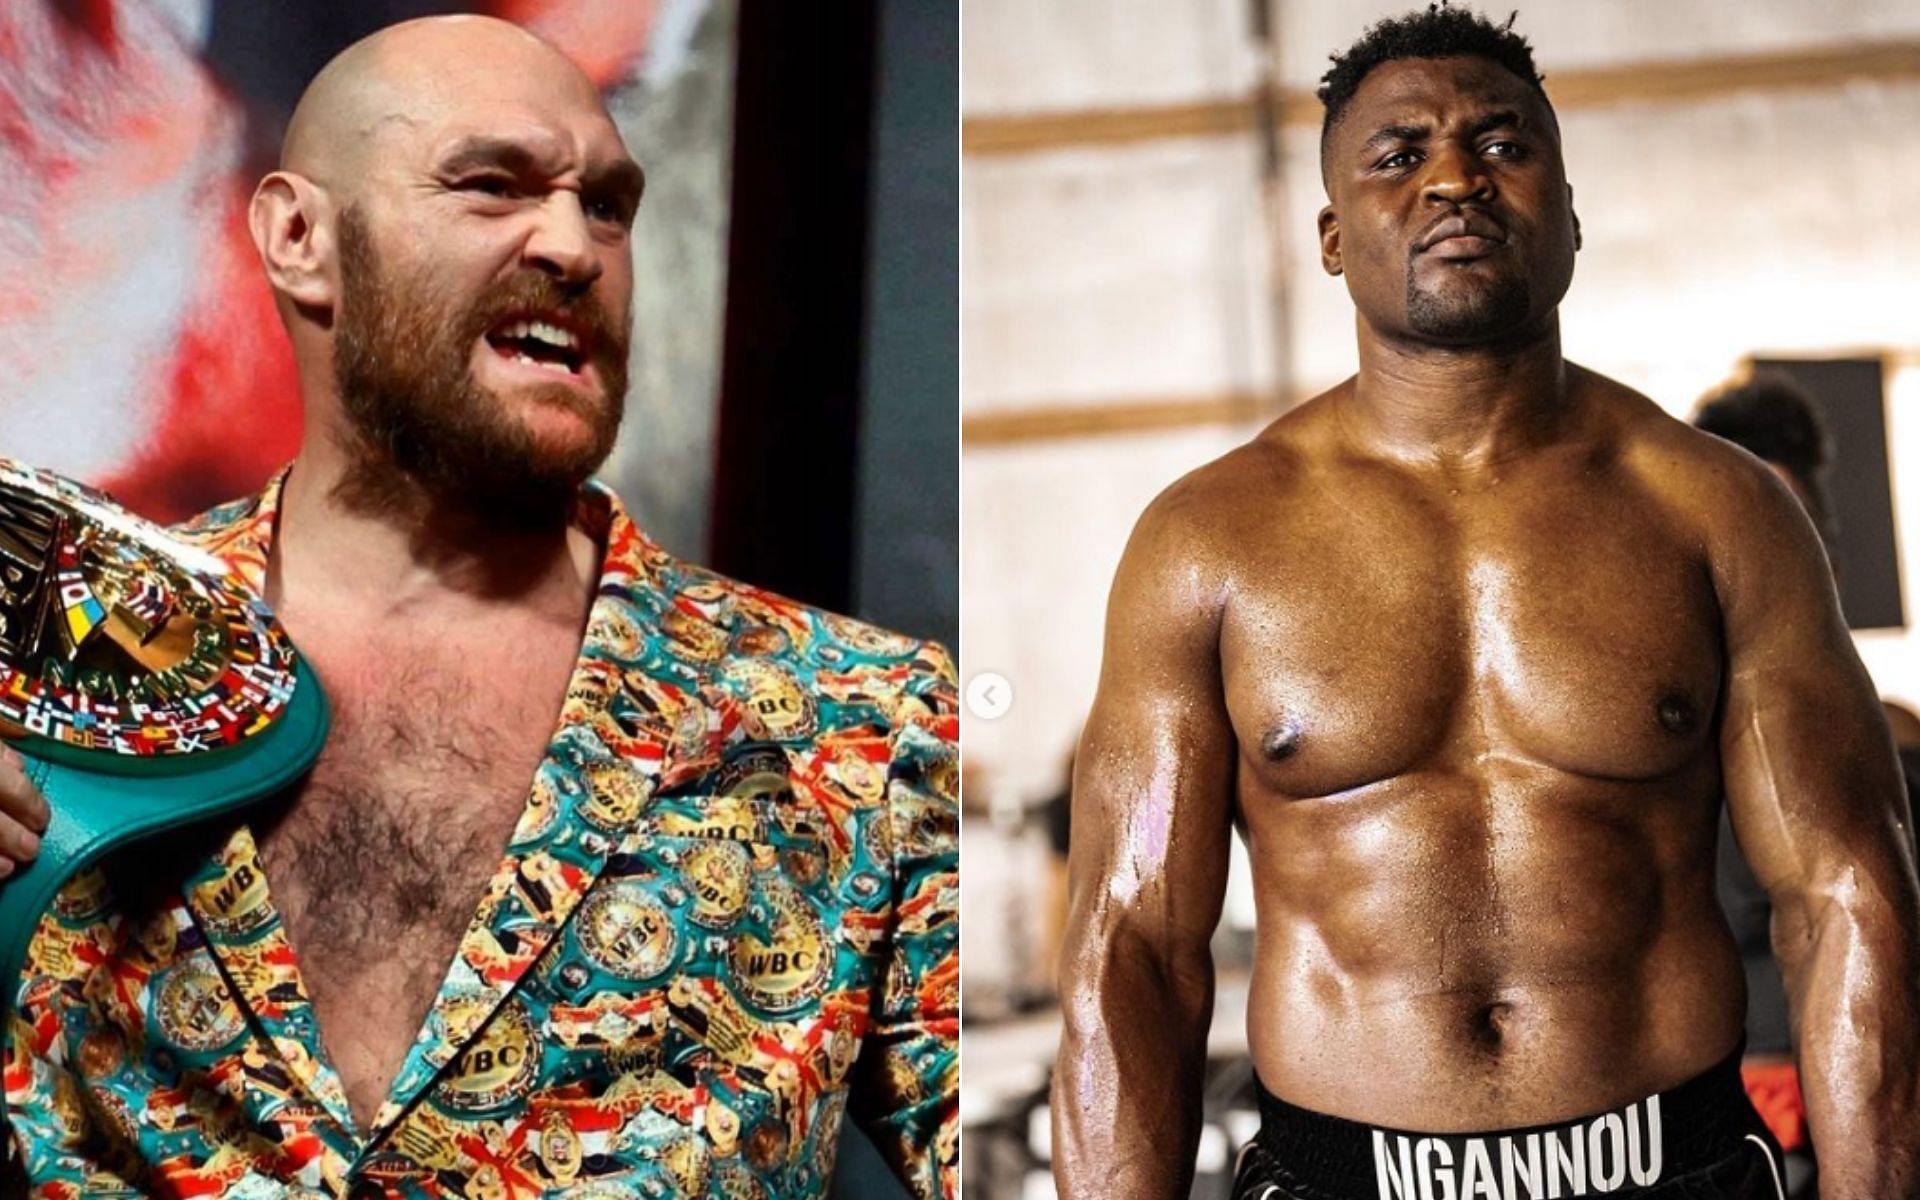 Tyson Fury [Left], and Francis Ngannou [Right] [Photo credit: @francisngannou and @tysonfury - Instagram]